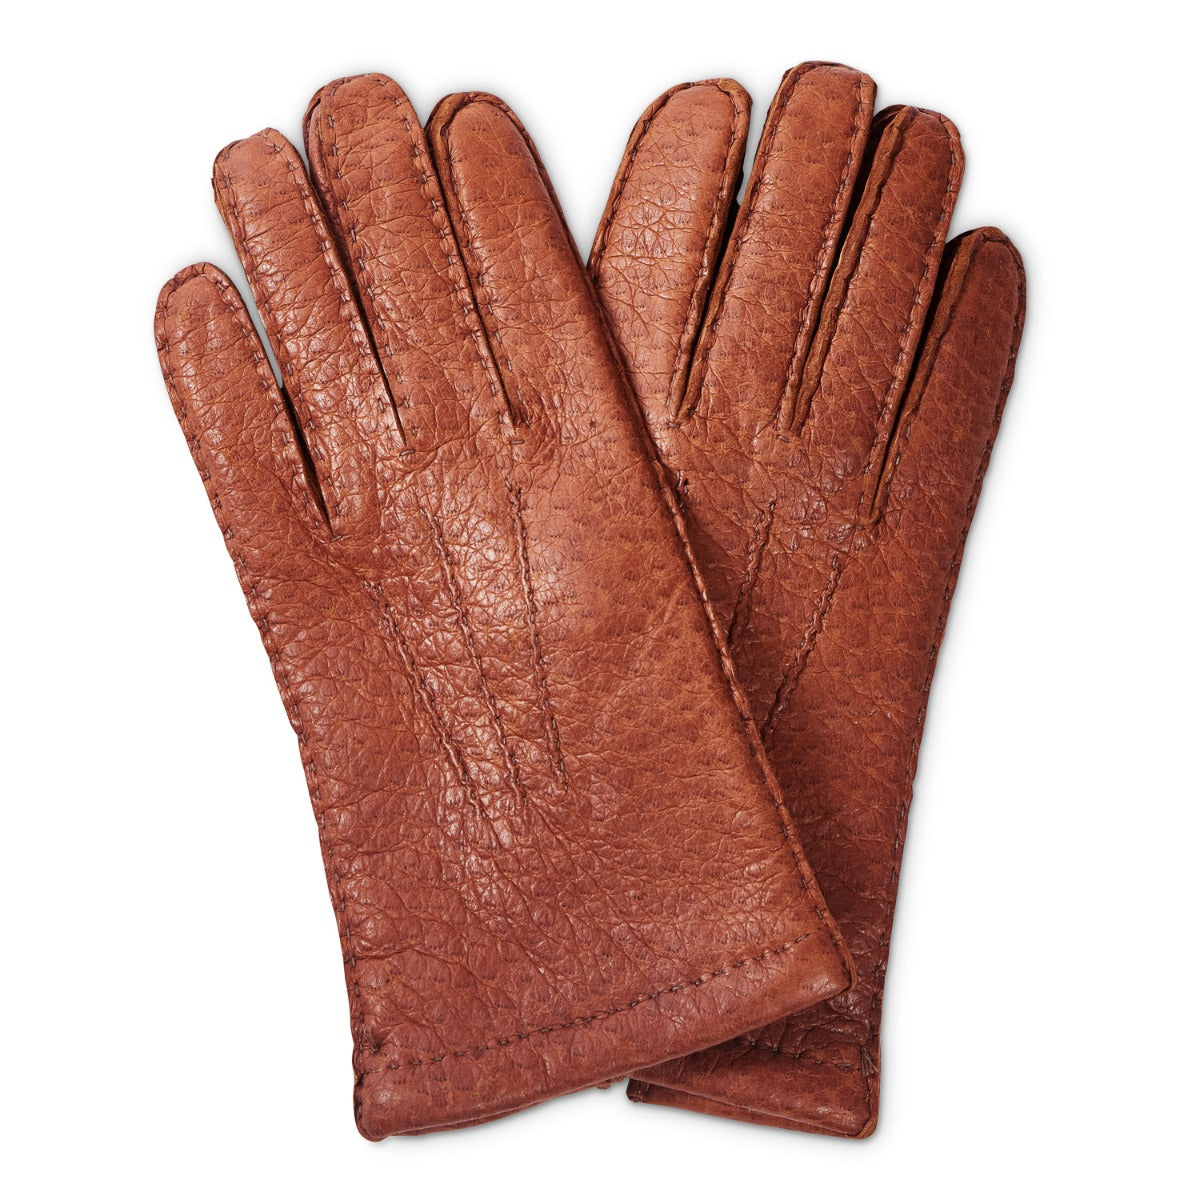 KirbyAllison.com's Sovereign Grade Medium Brown Peccary Leather Gloves, Unlined, deliver comfort on a white background.